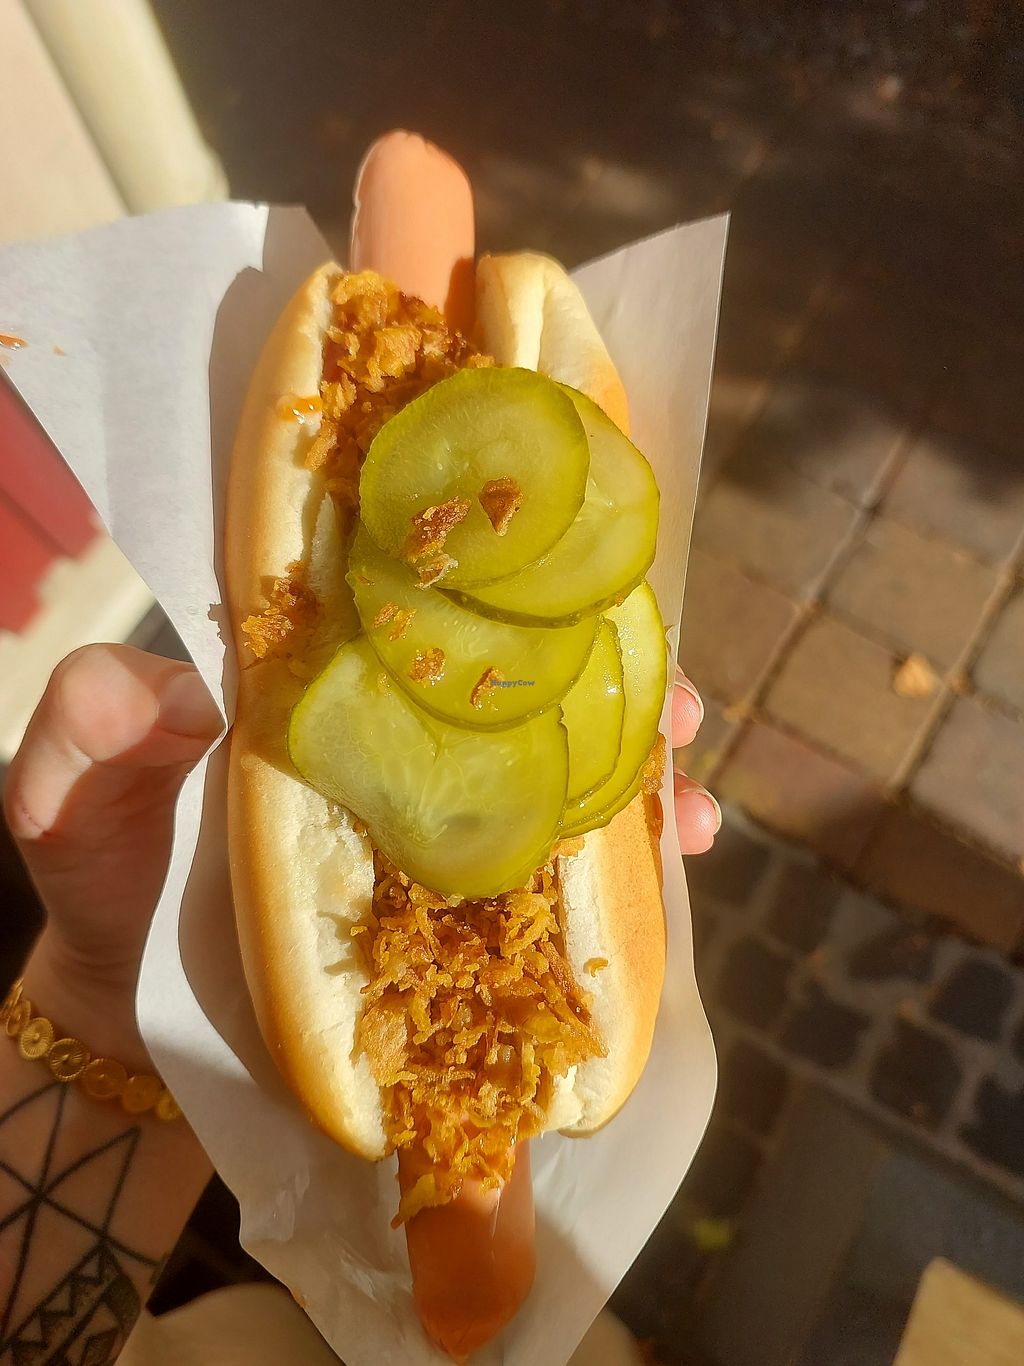 cristine yu recommends dick in a hot dog pic